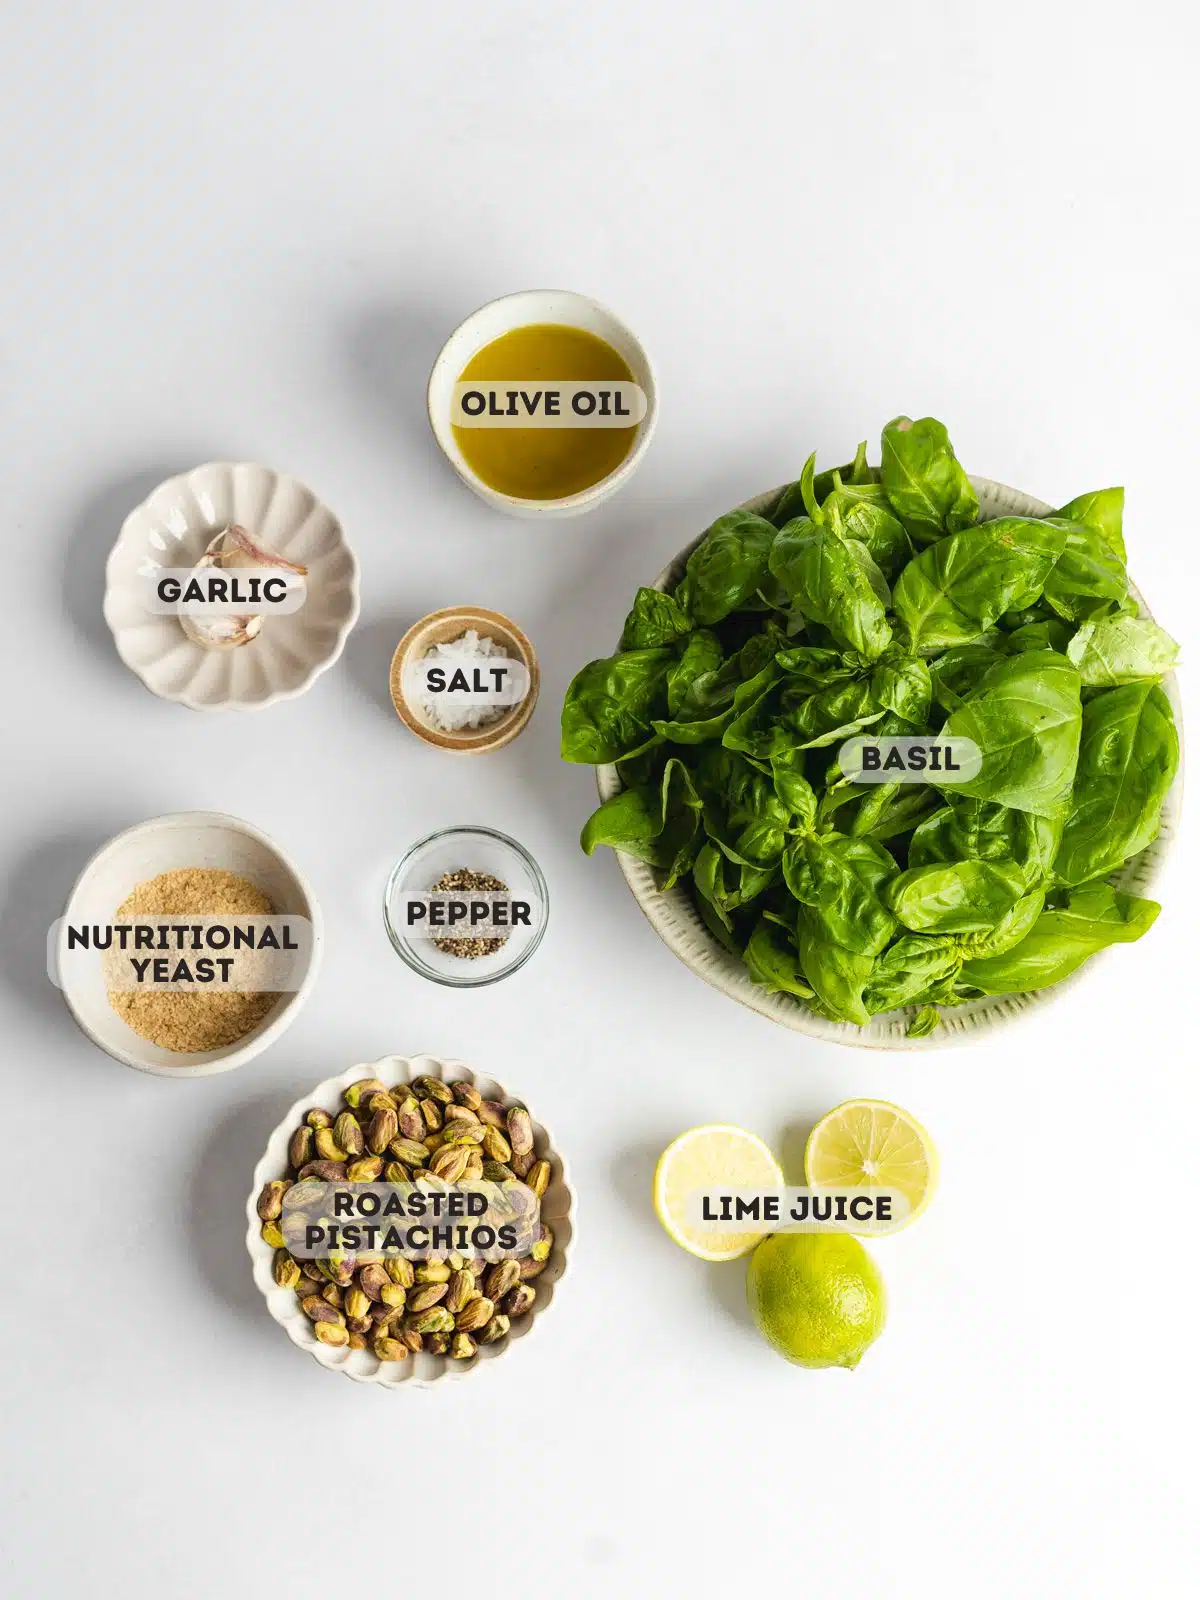 ingredients to make fresh basil pesto with pistachios measured out in bowls on a light gray surface.